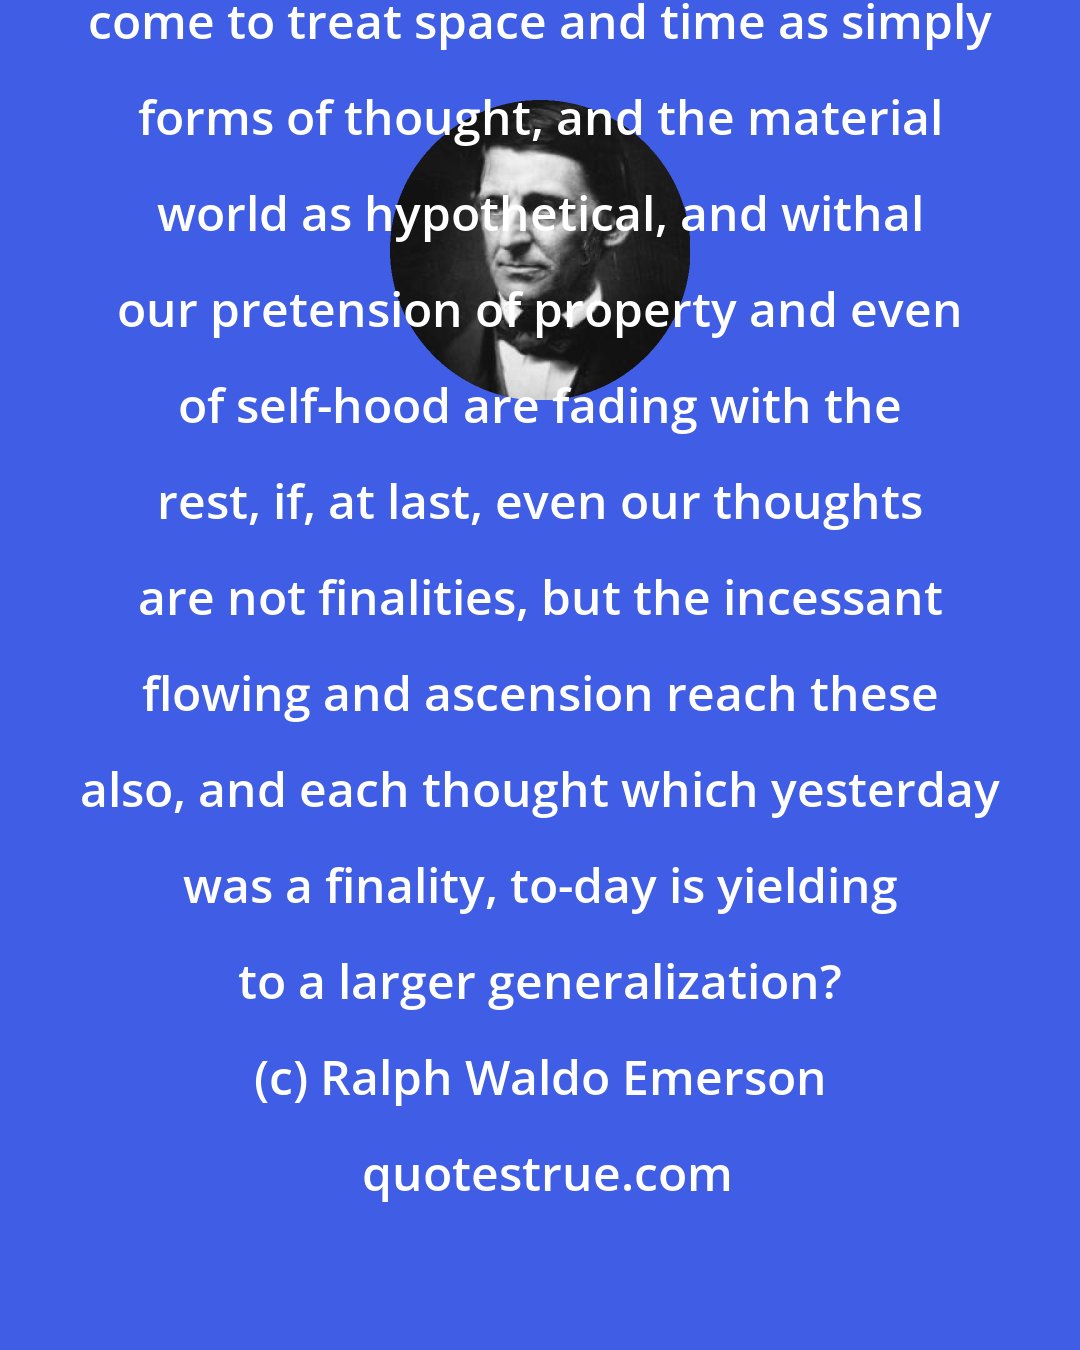 Ralph Waldo Emerson: And what avails it that science has come to treat space and time as simply forms of thought, and the material world as hypothetical, and withal our pretension of property and even of self-hood are fading with the rest, if, at last, even our thoughts are not finalities, but the incessant flowing and ascension reach these also, and each thought which yesterday was a finality, to-day is yielding to a larger generalization?